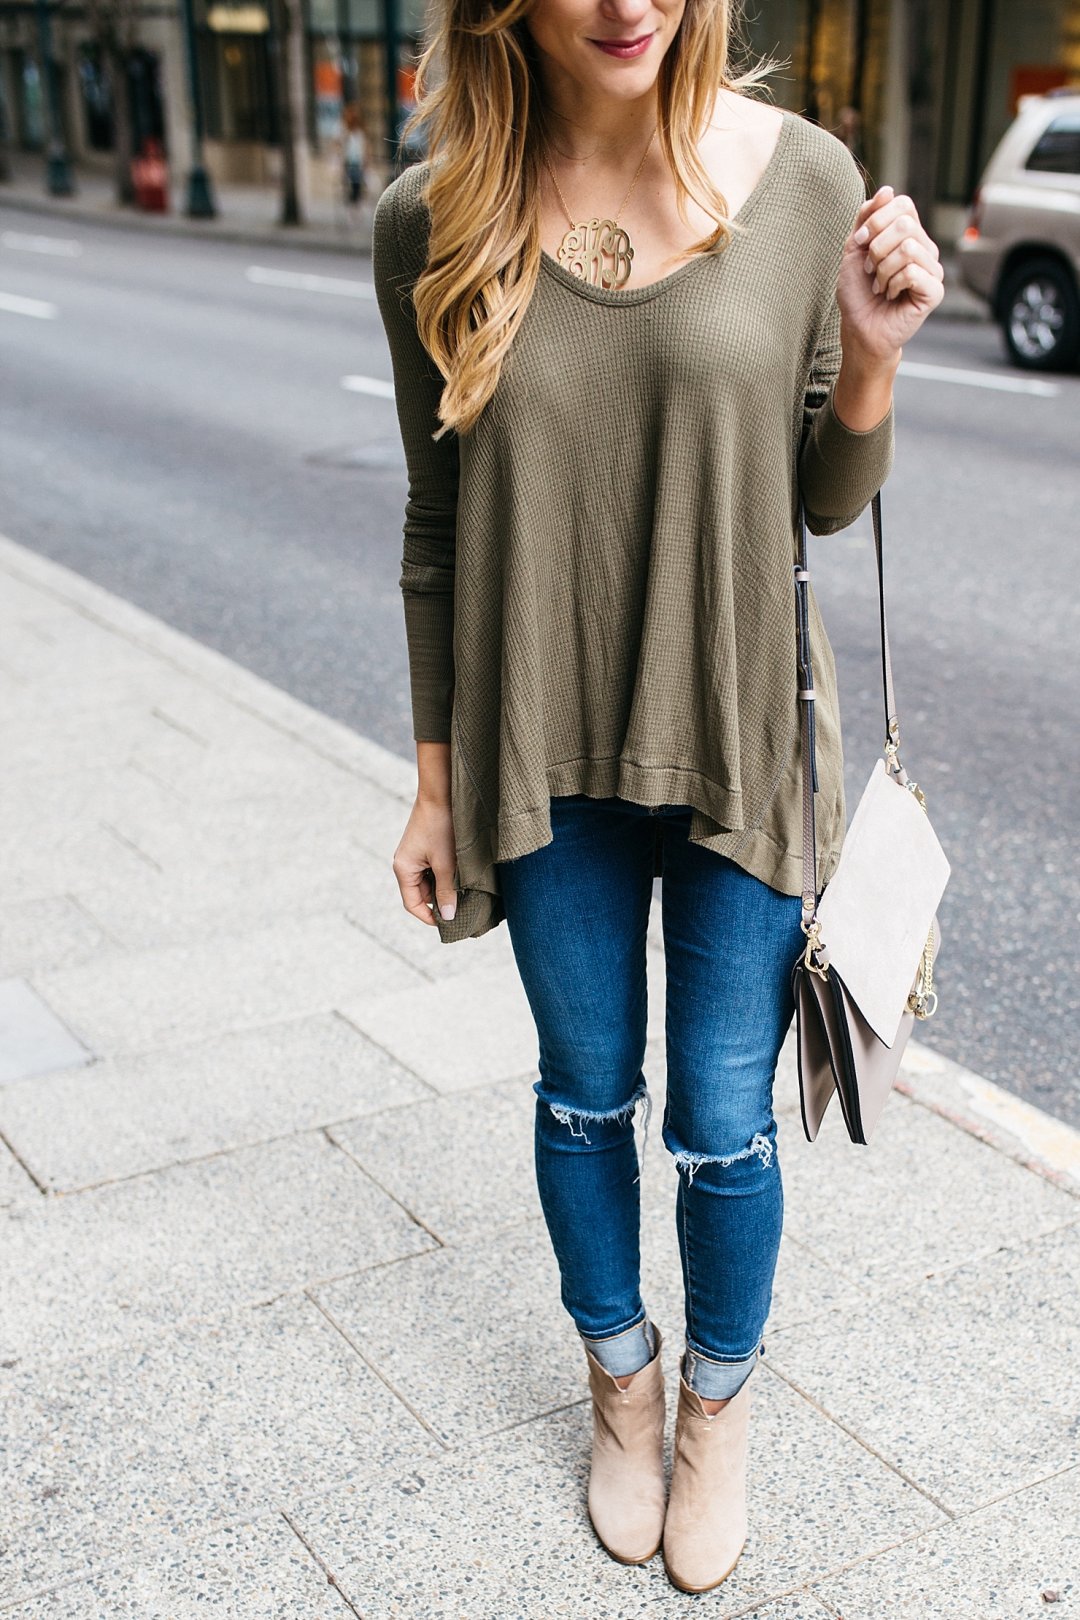 chloe fay handbag, olive green free people waffle tee, blue jeans, vince camuto booties, fall outfit details, AG legging jeans